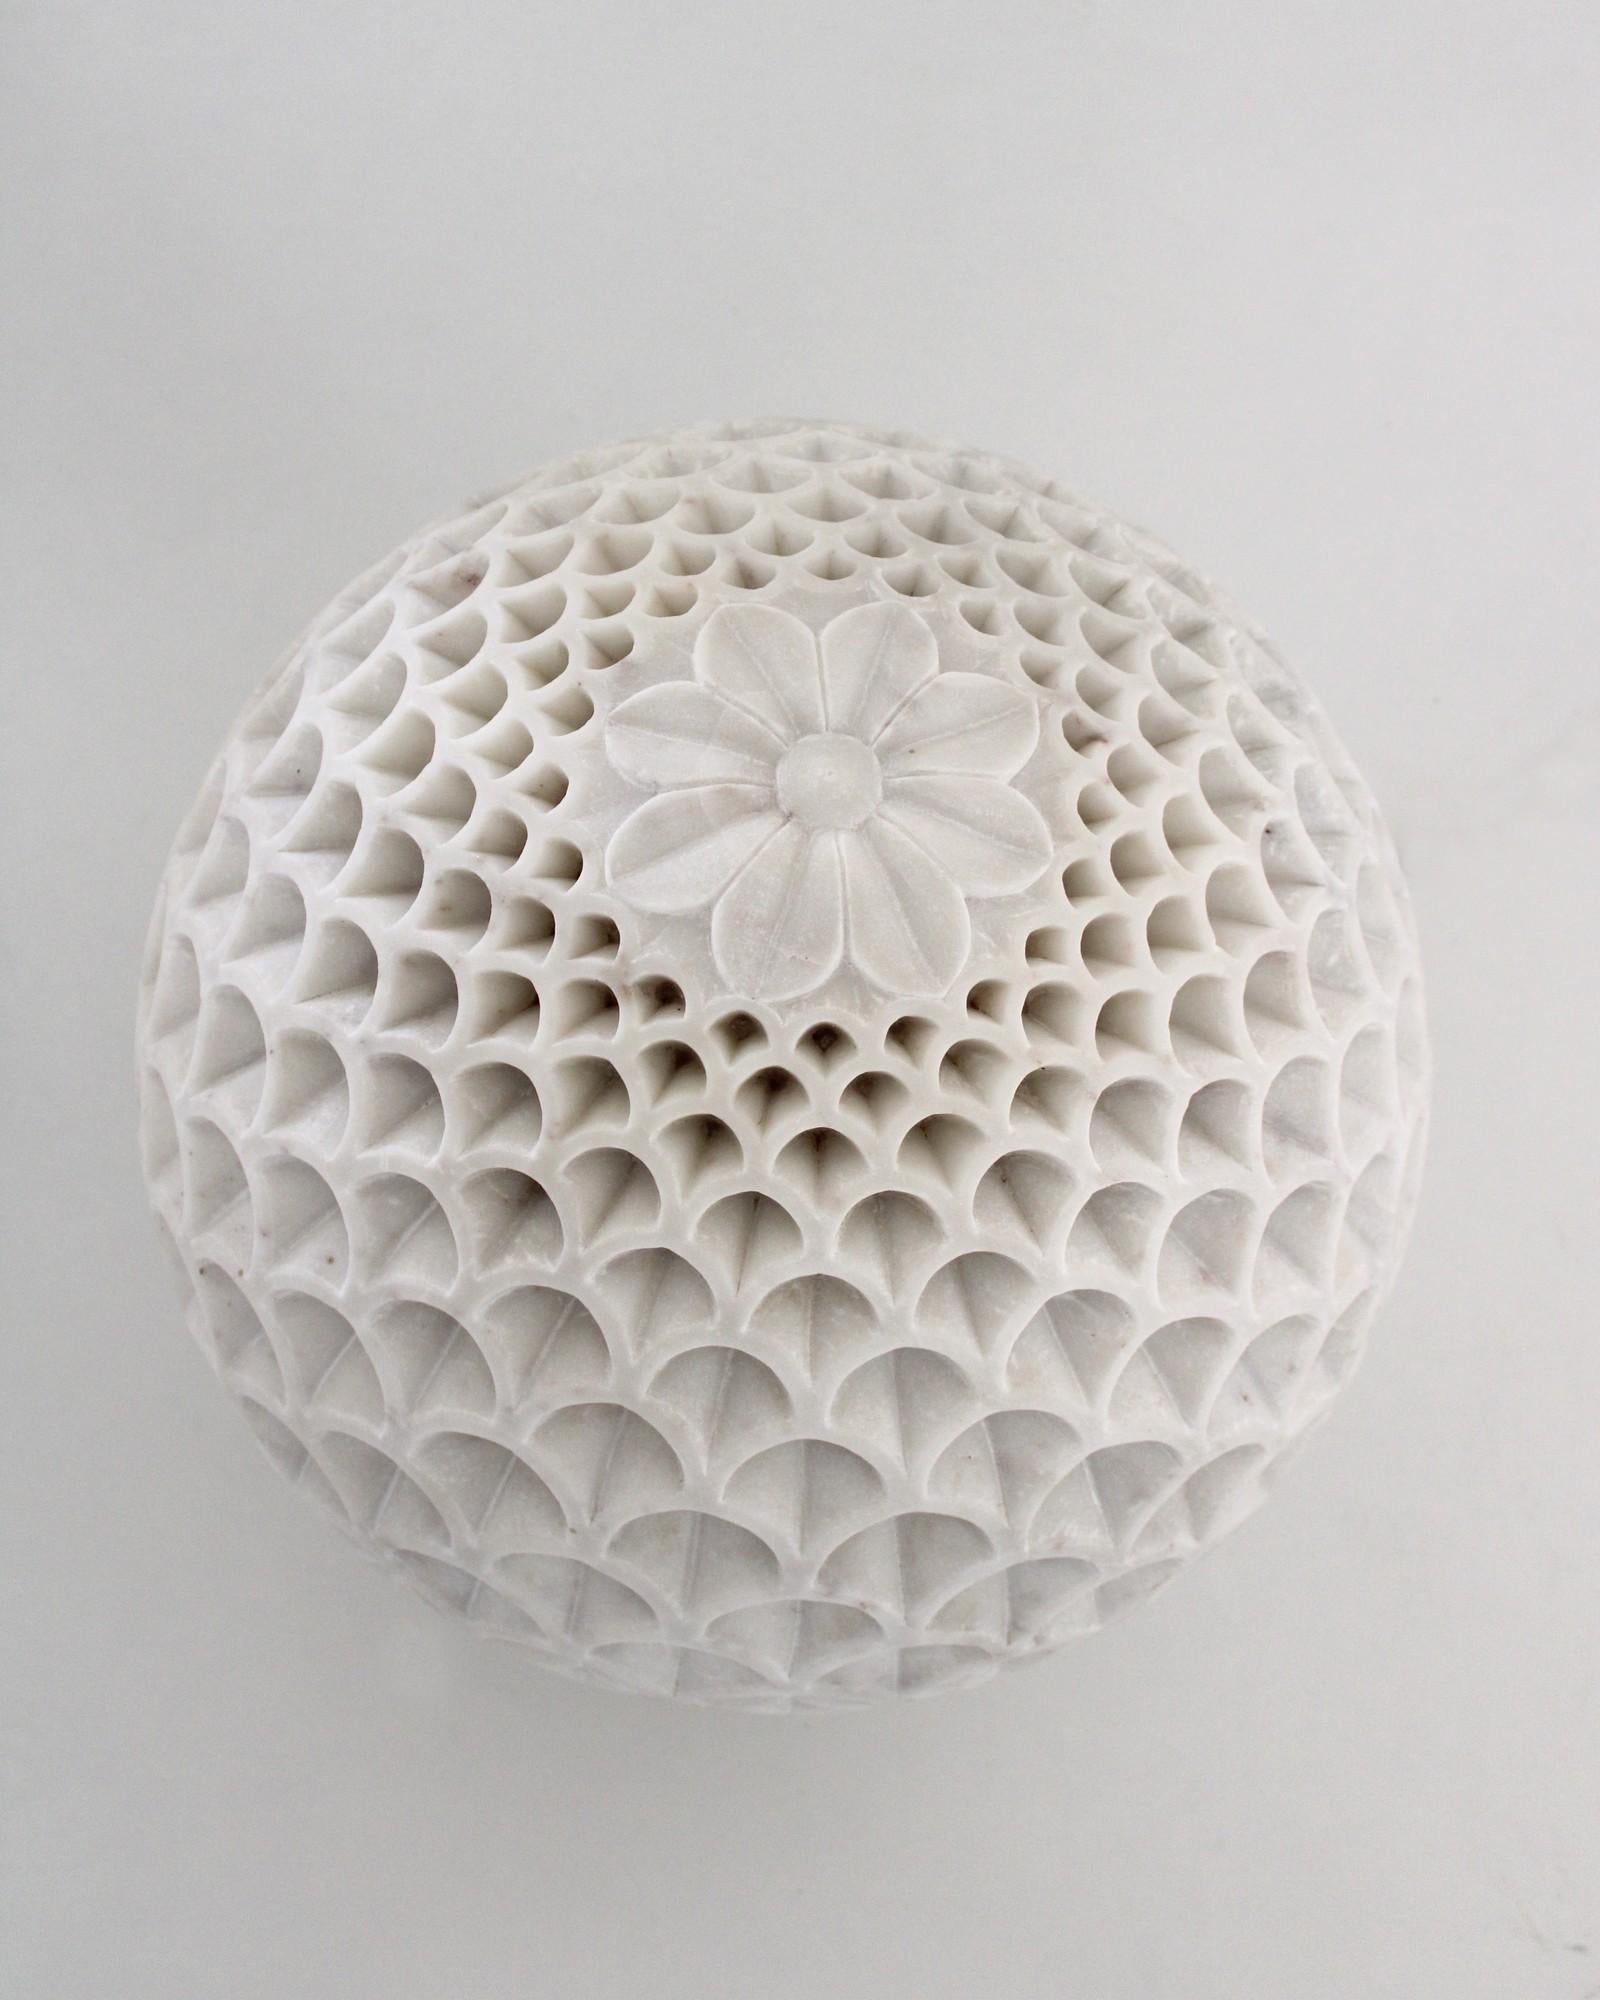 Inspired by the Pinecone, Paul Mathieu designed this beautiful floor/outdoor lighting fixture. Solid pieces of marble are first turned into hemispherical halves and hand-carved to create the intricate carving motif which plays with the translucent